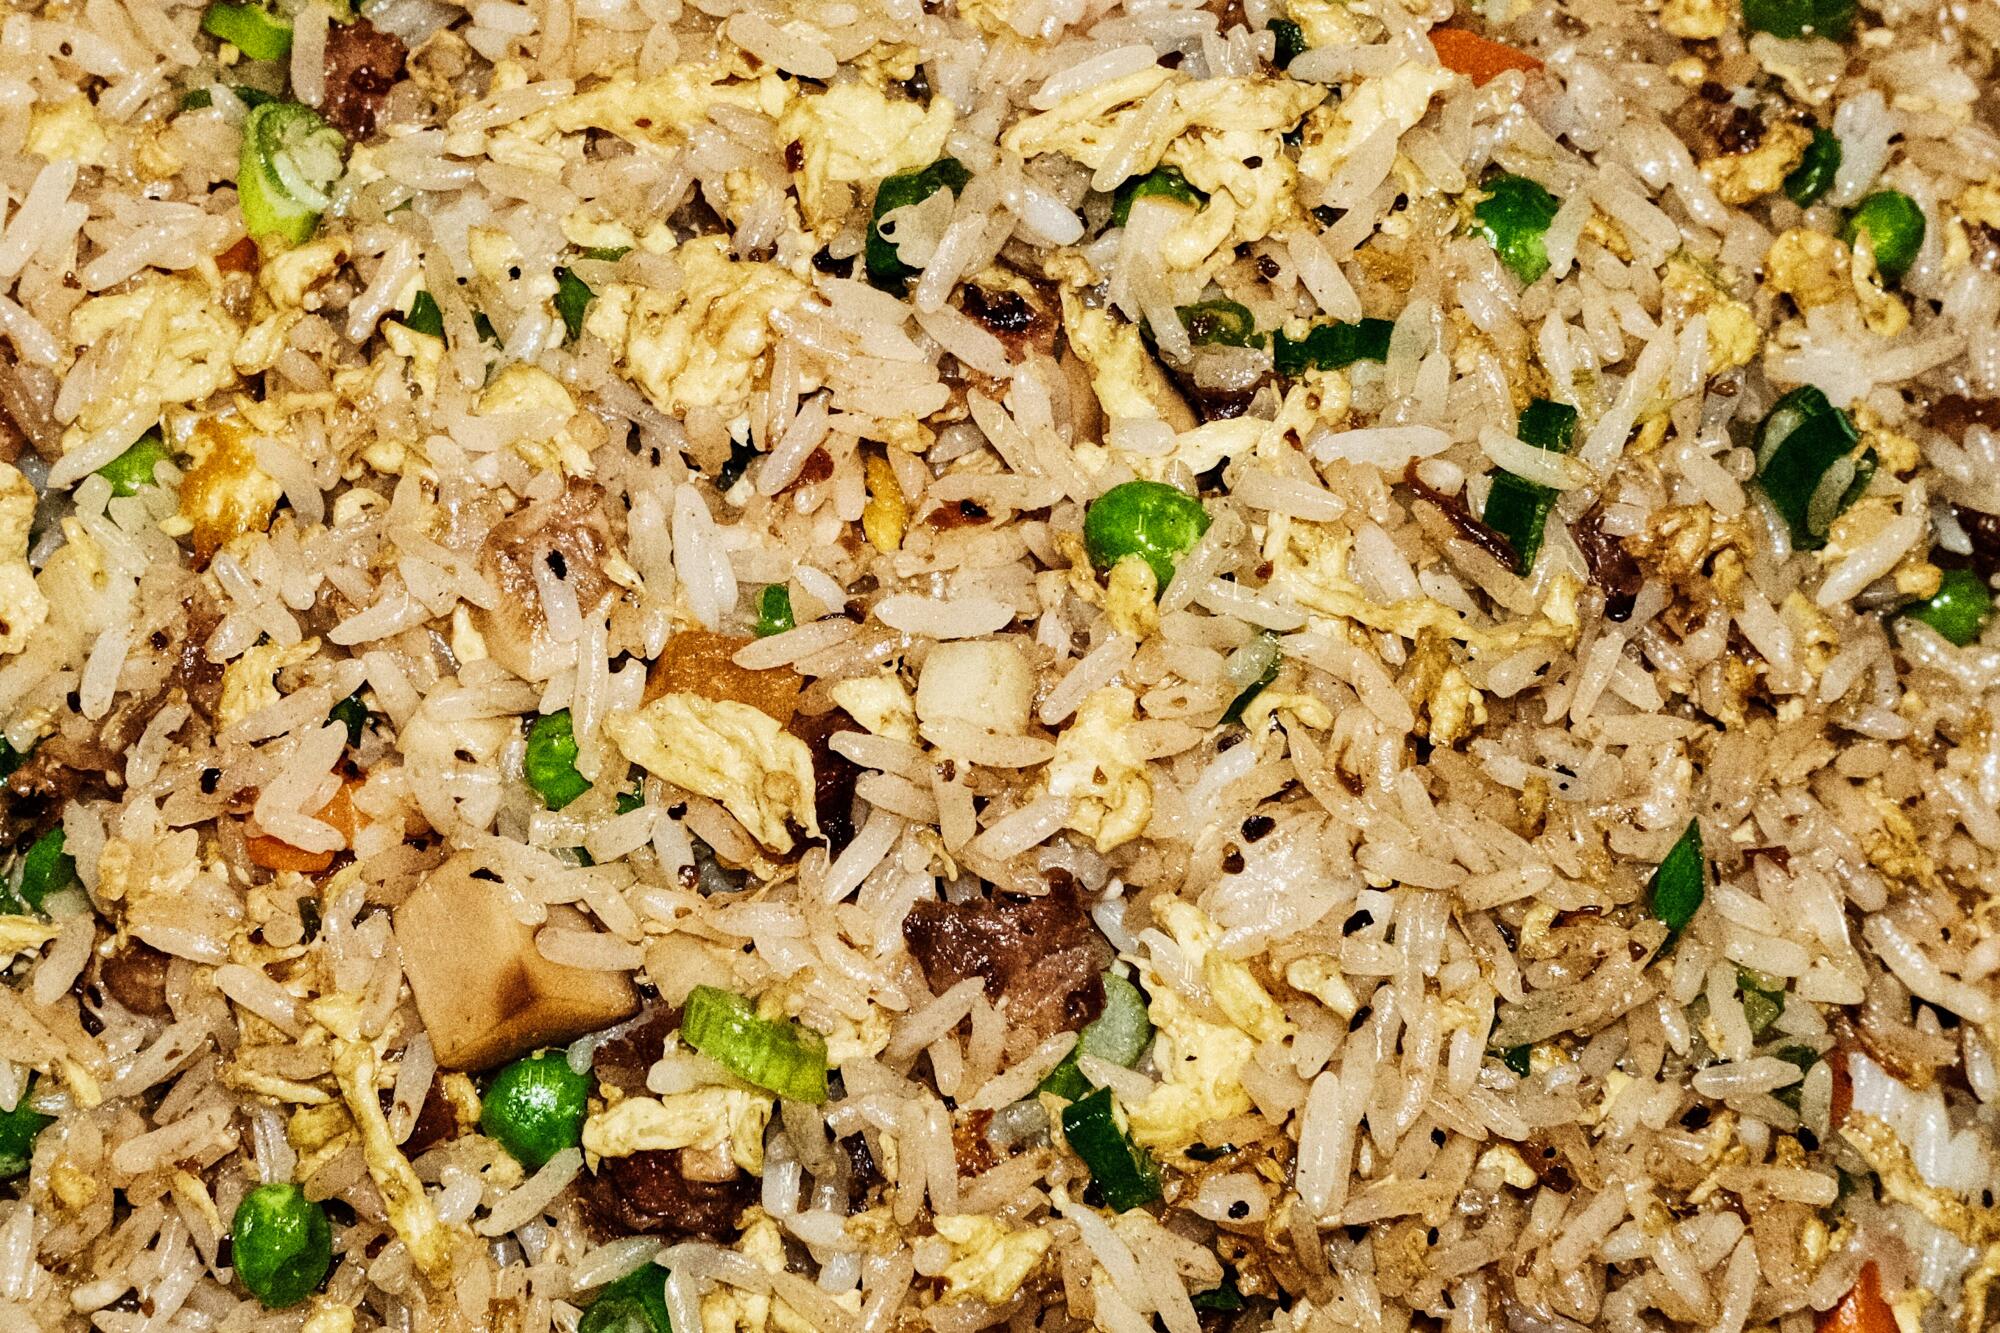 Fried rice is sprinkled with vegetables and egg in Array 36.